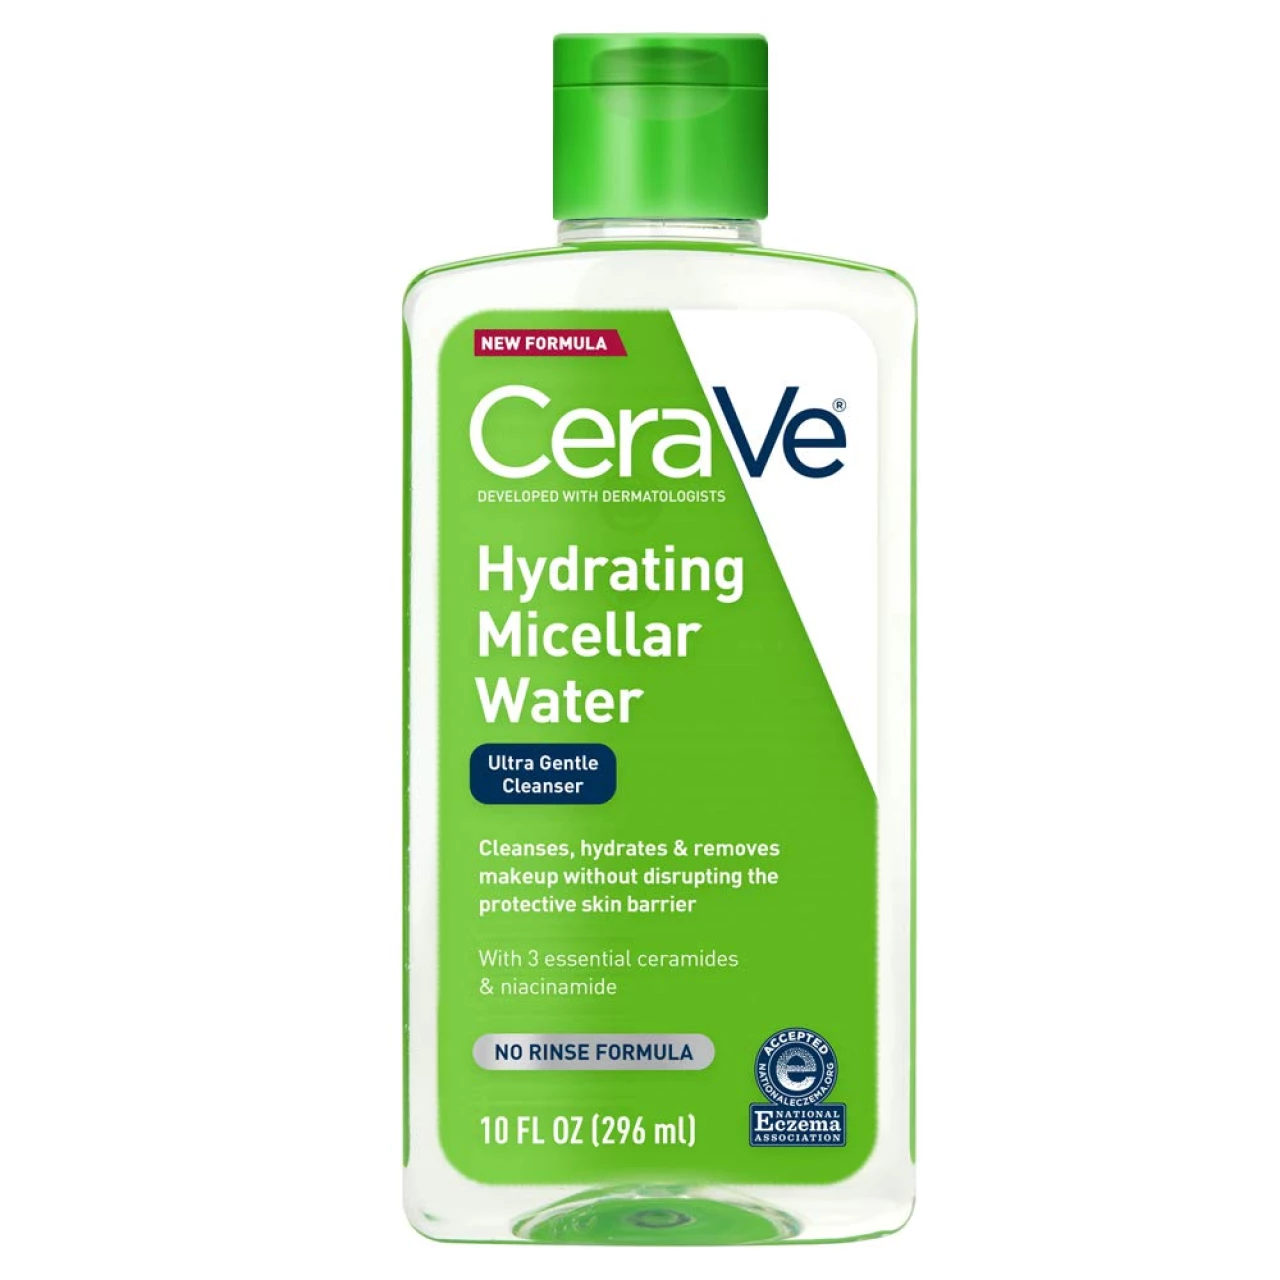 CeraVe Micellar Water | New &amp; Improved Formula | Hydrating Facial Cleanser &amp; Eye Makeup Remover | Fragrance Free &amp; Non-Irritating | 10 Fl. Oz